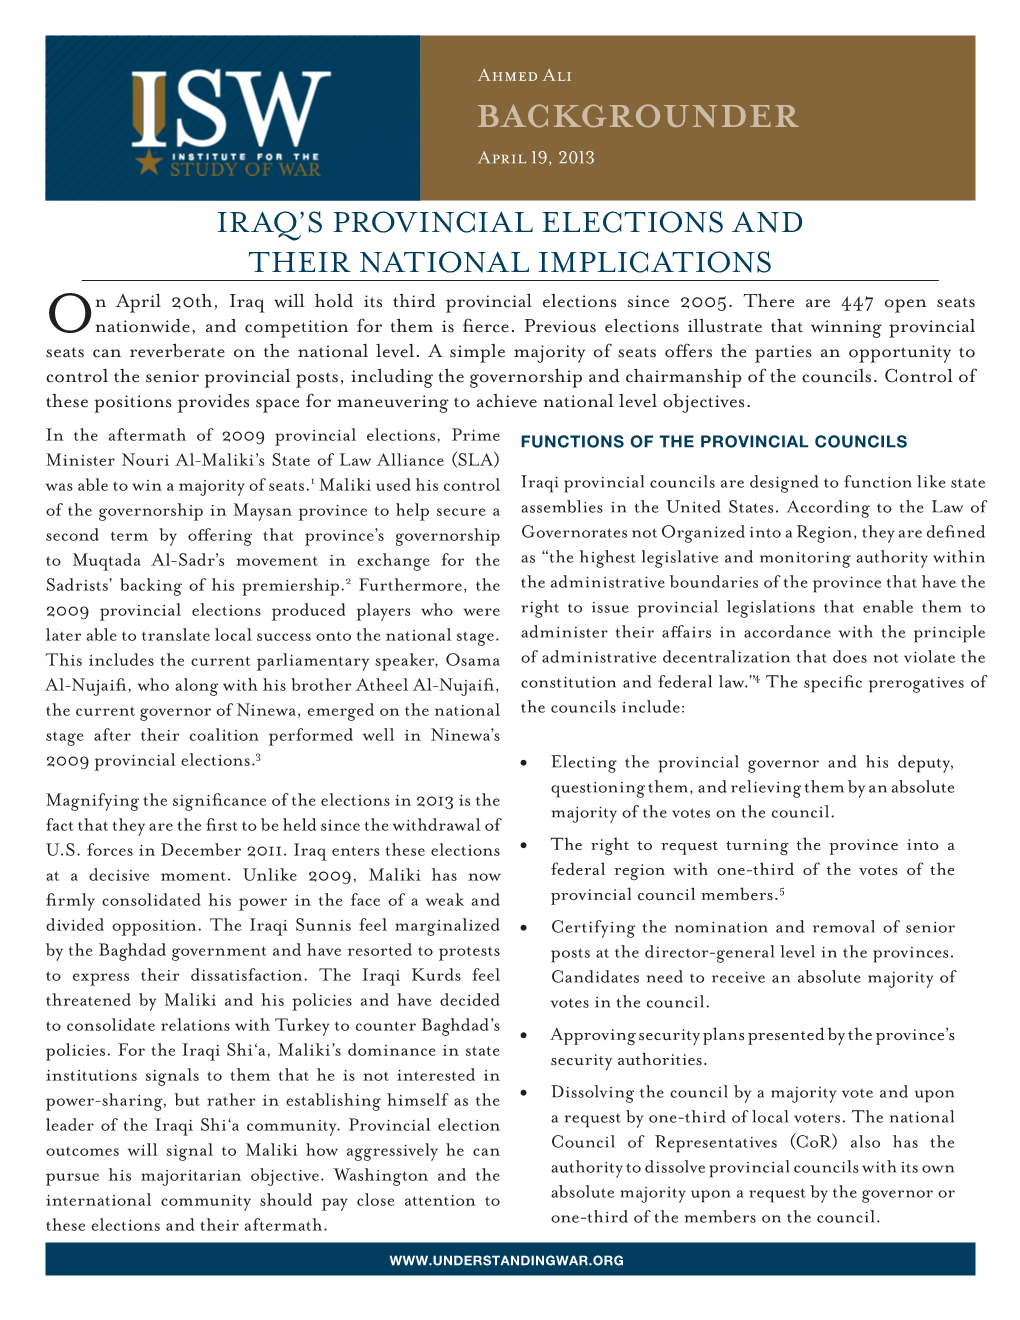 Iraq's Provincial Elections and Their National Implications